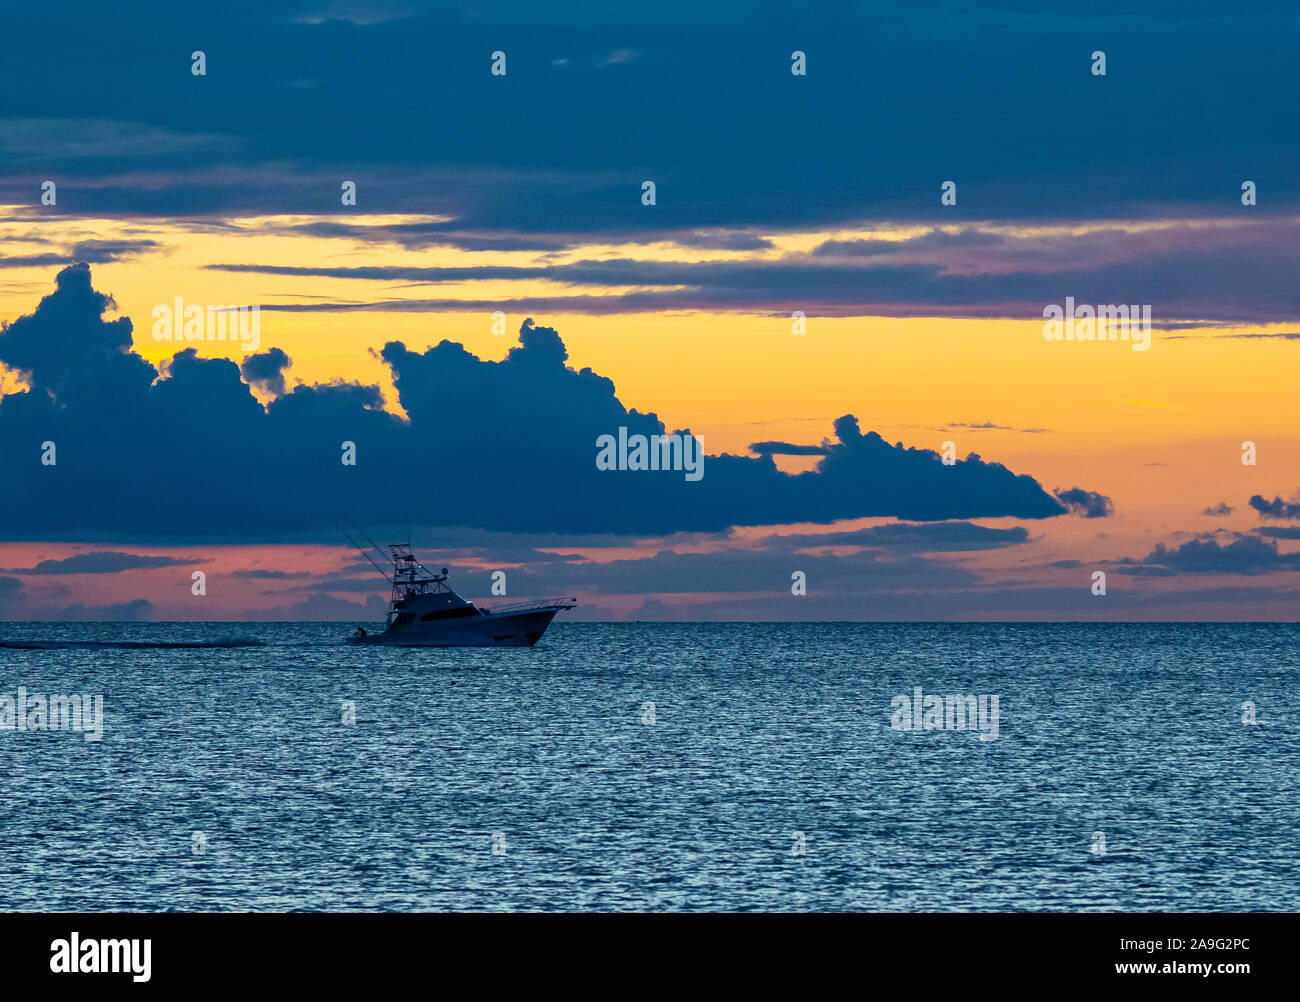 Boat in Gulf of Mexico silhoutted against a sunset sky off Venice Florida Stock Photo